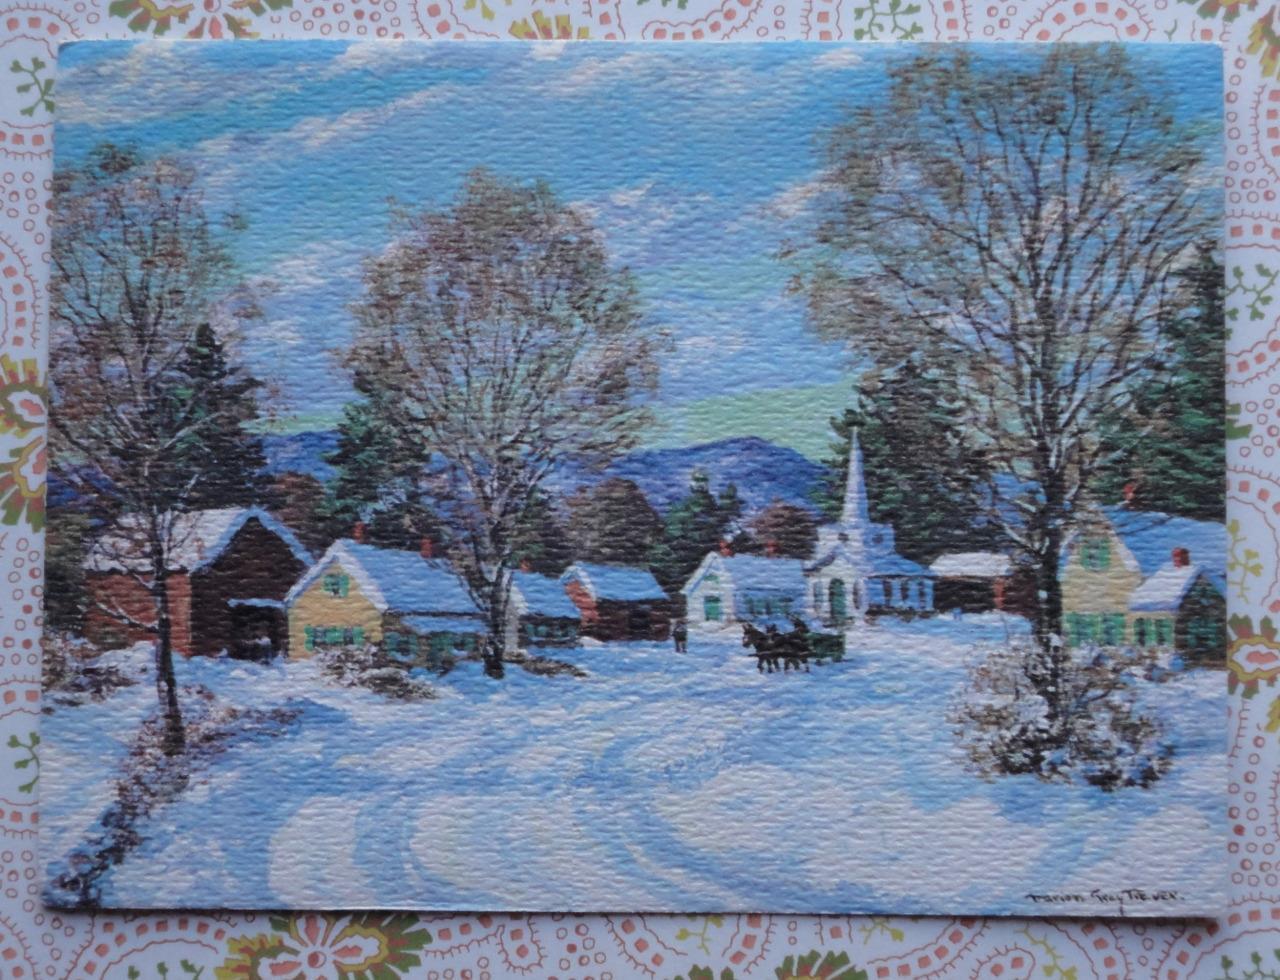 Vintage 1960s Christmas Card SNOWY VILLAGE Watercolor A/S Marion Gray Traver